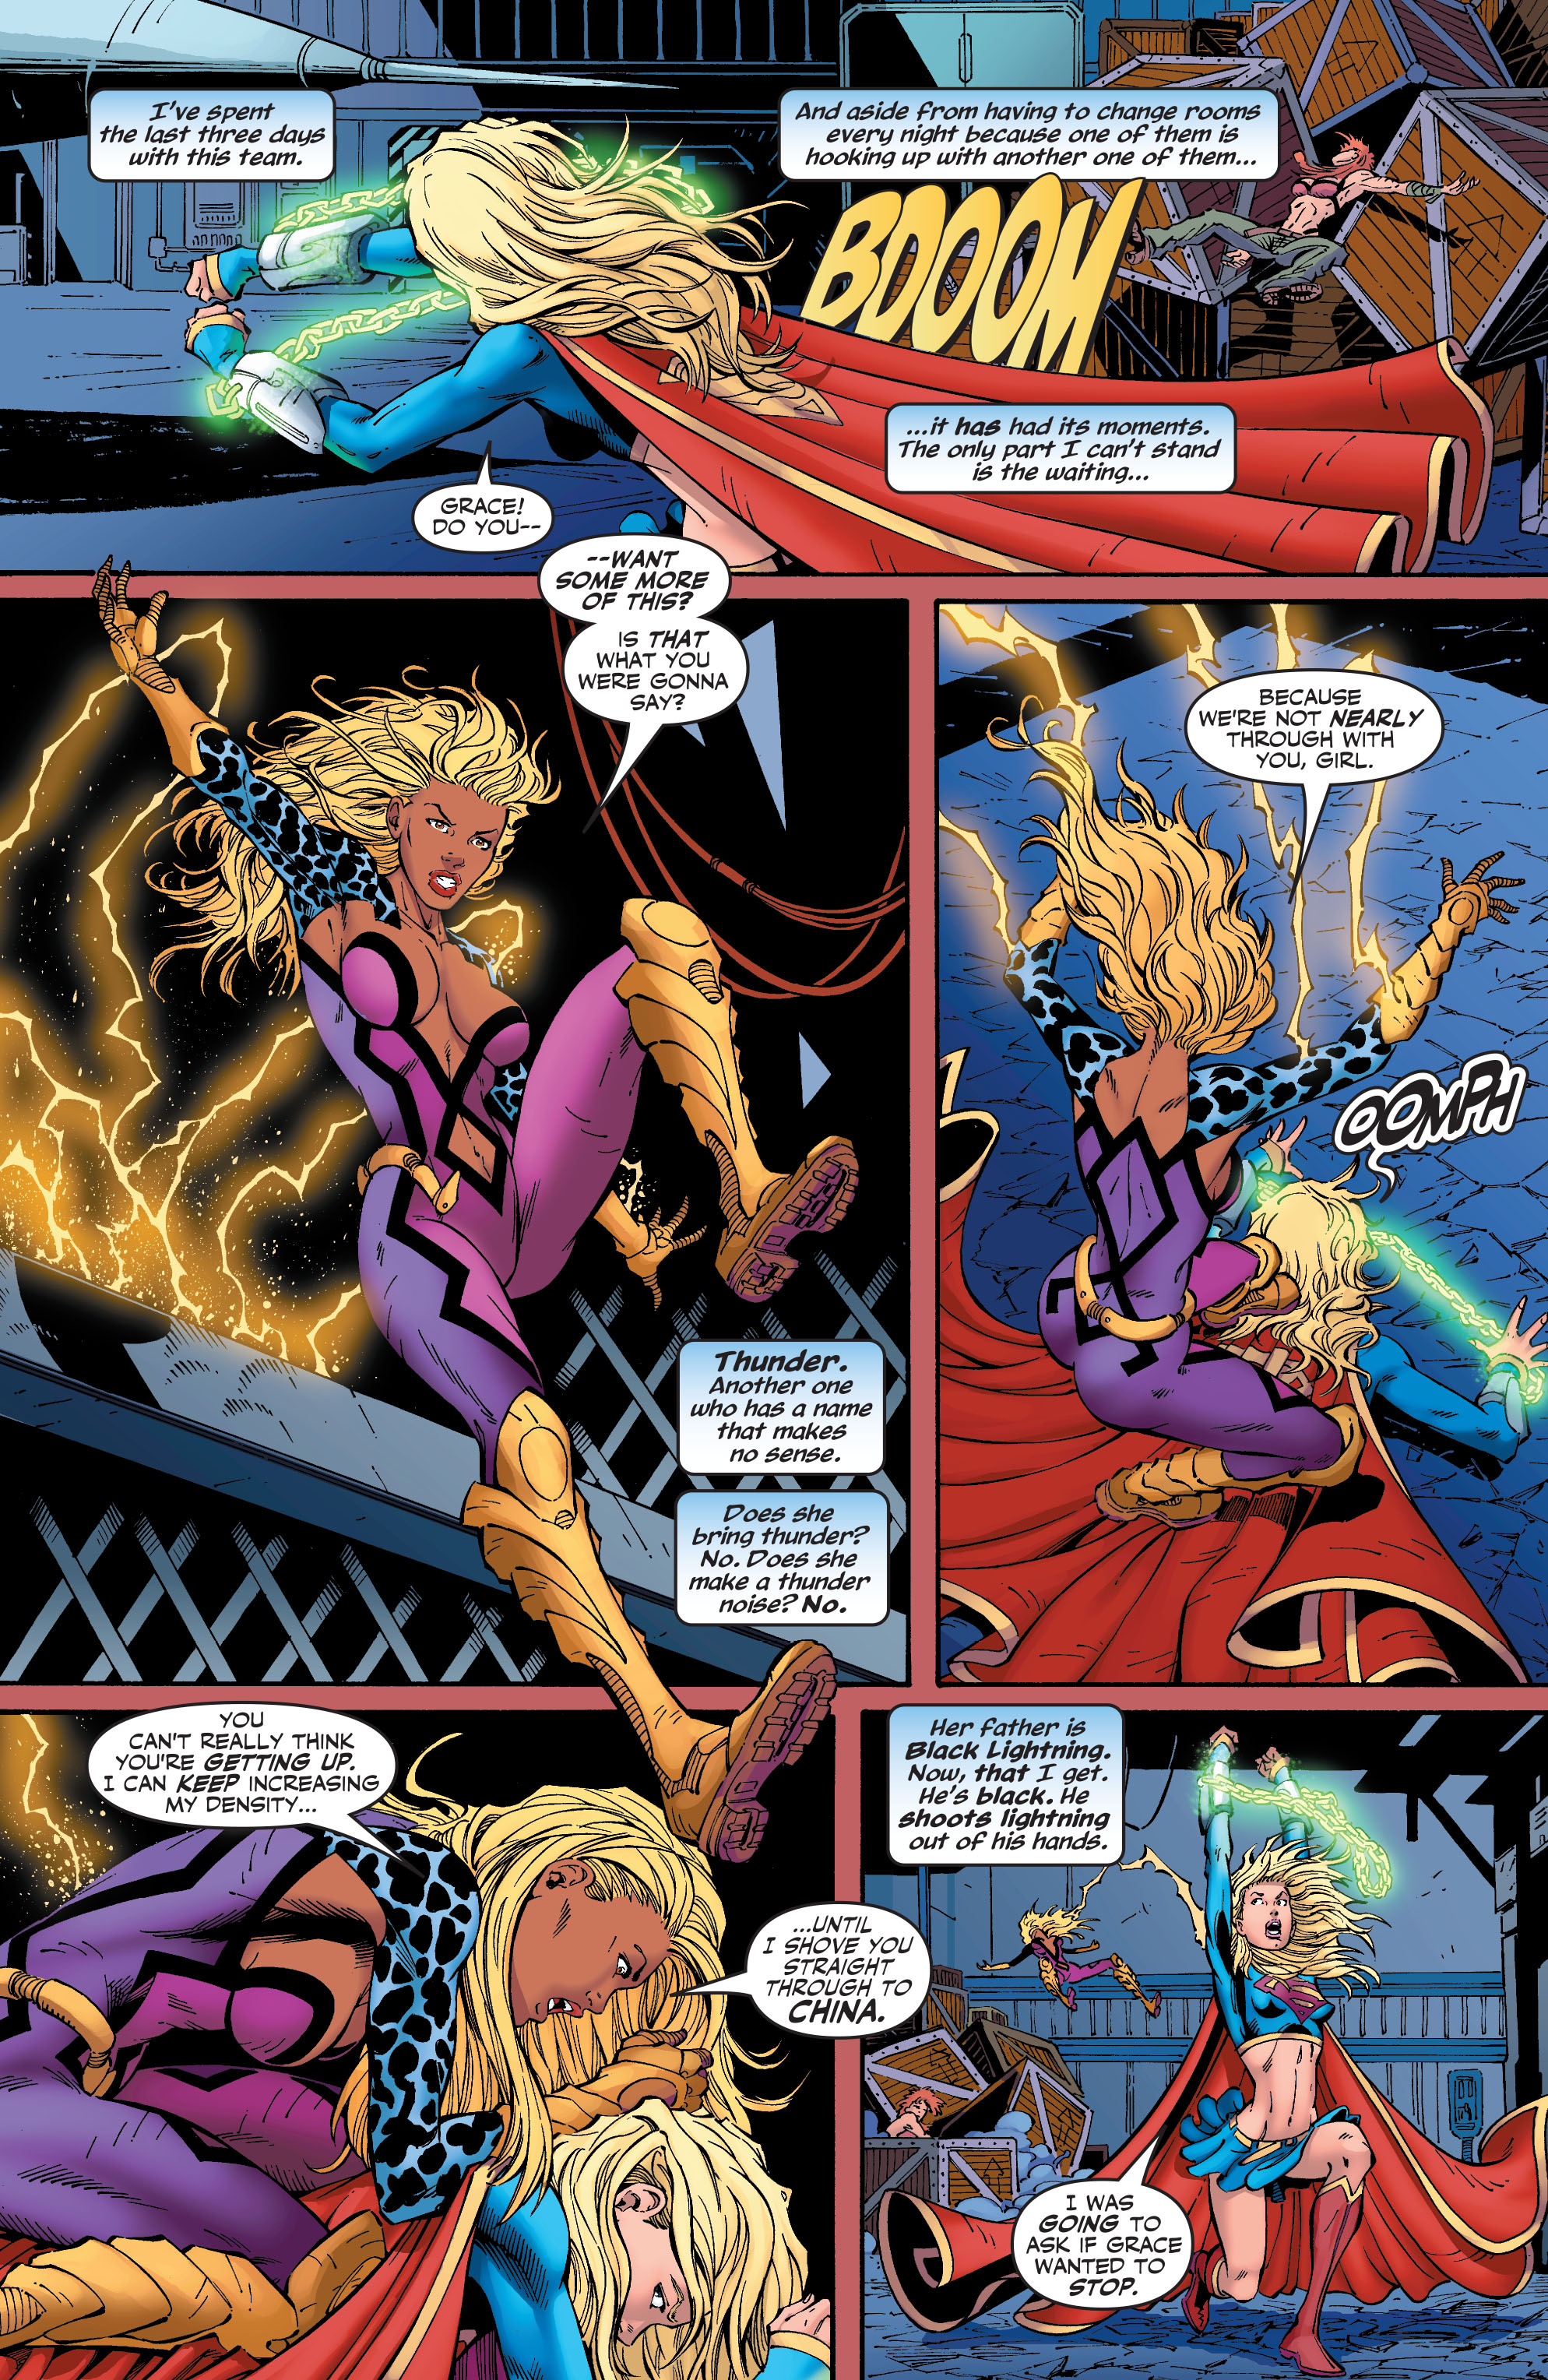 Supergirl (2005) 3 Page 4